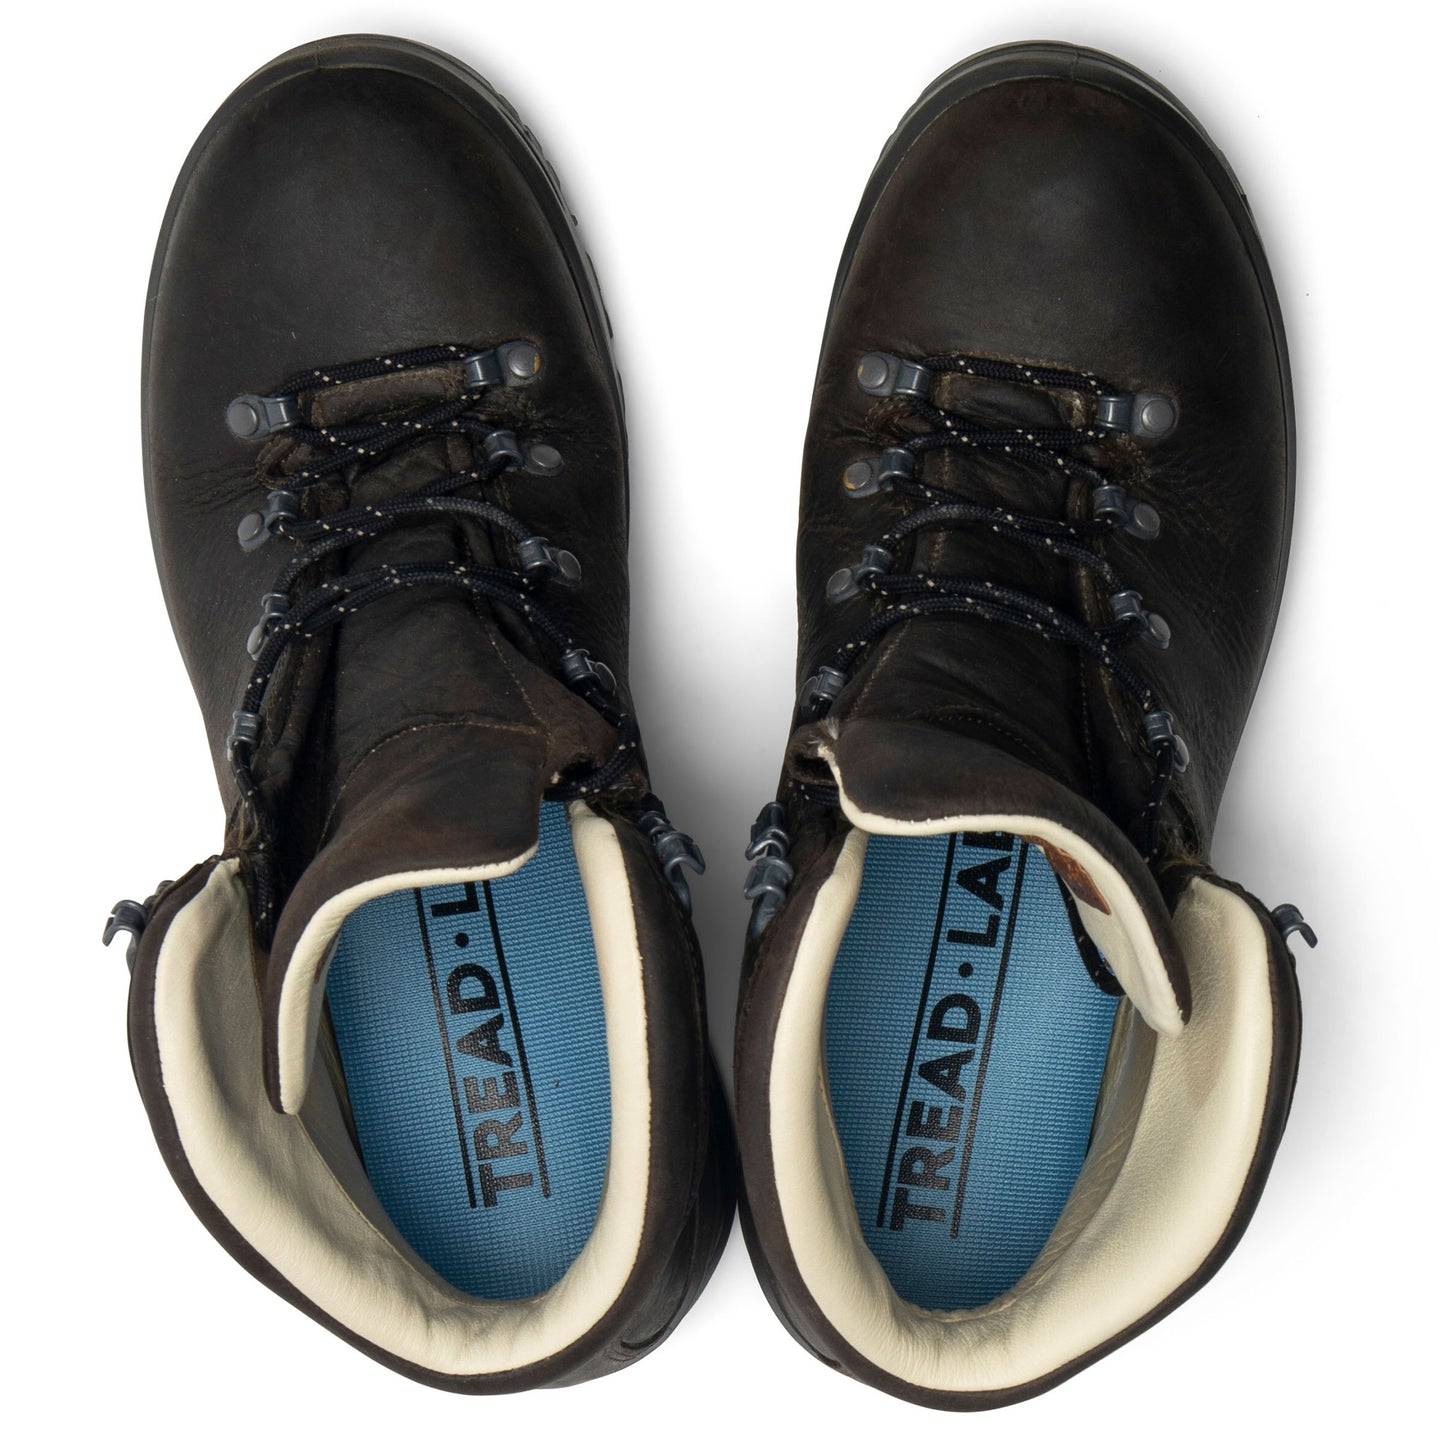 Pace Pain Relief Insole For Hiking Boots and Work Boots